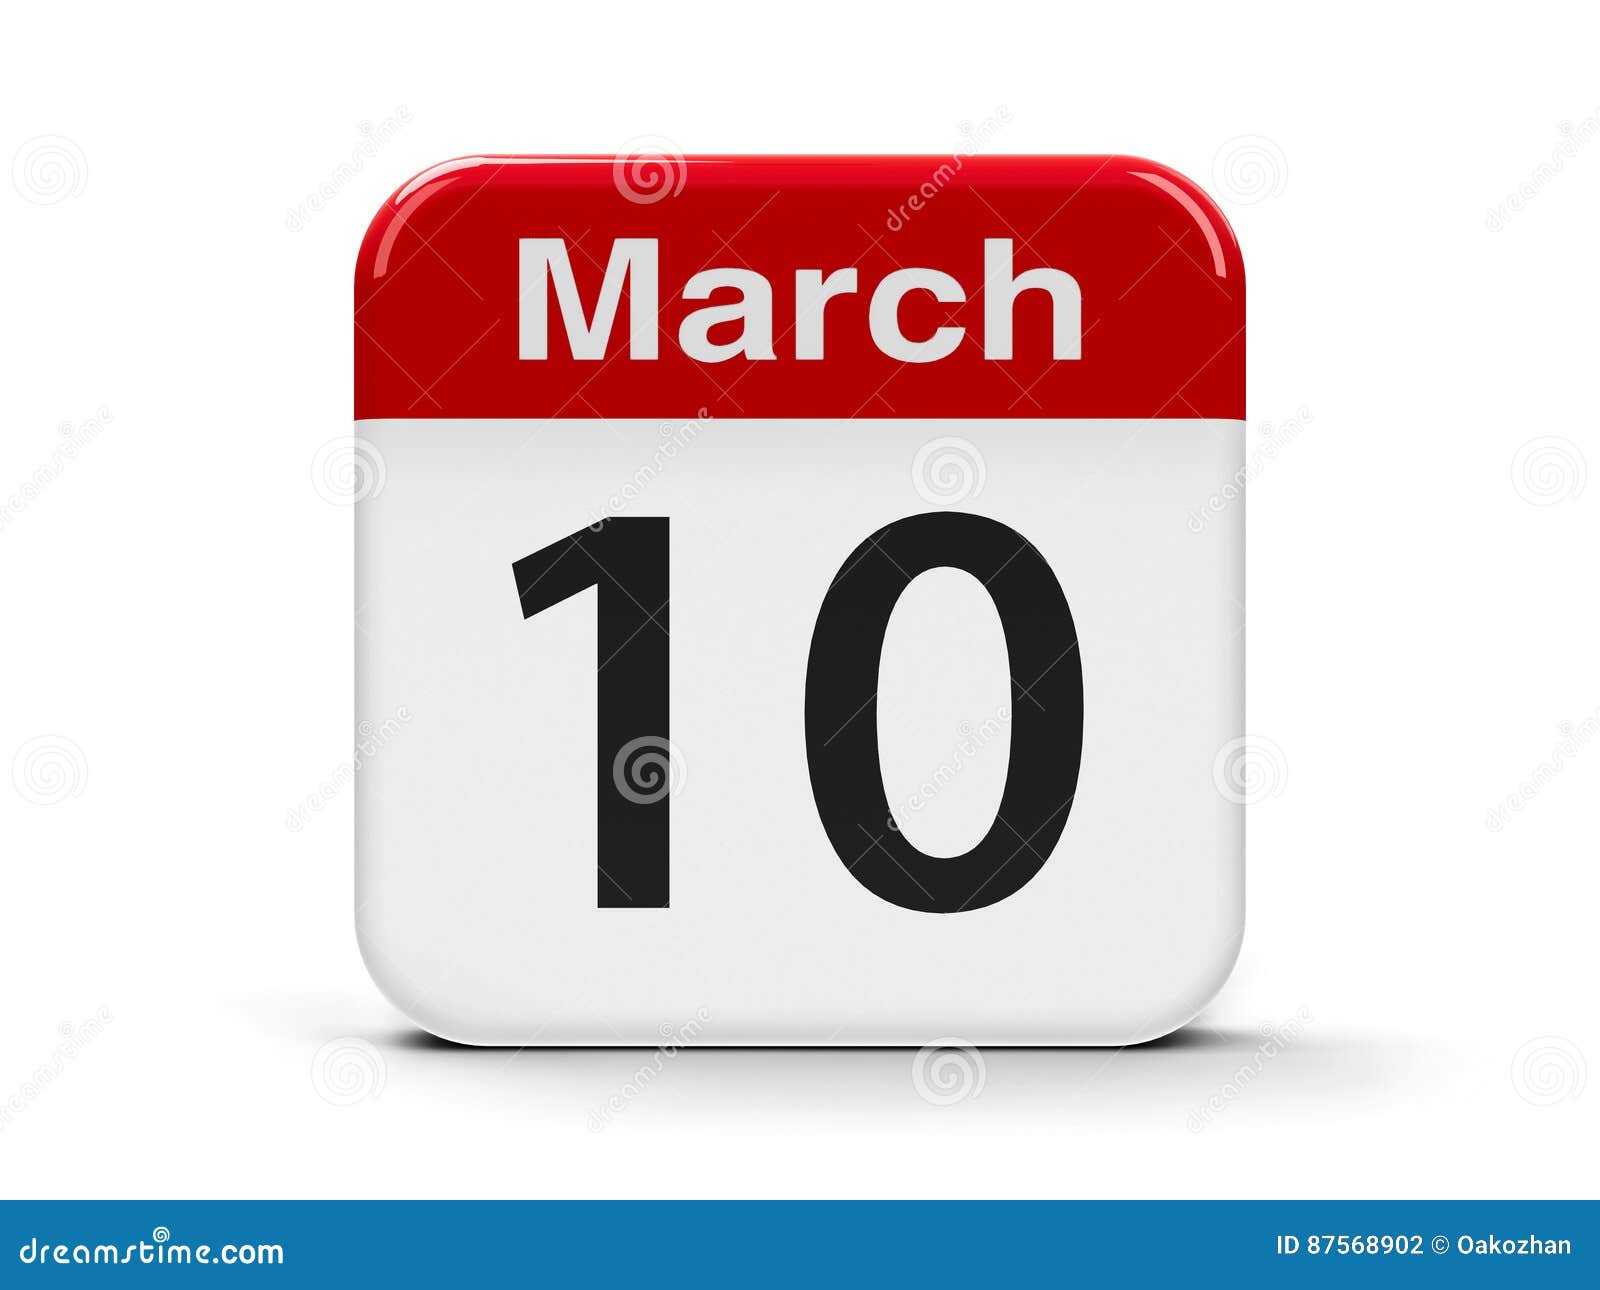 10th March stock illustration. Illustration of abstract 87568902